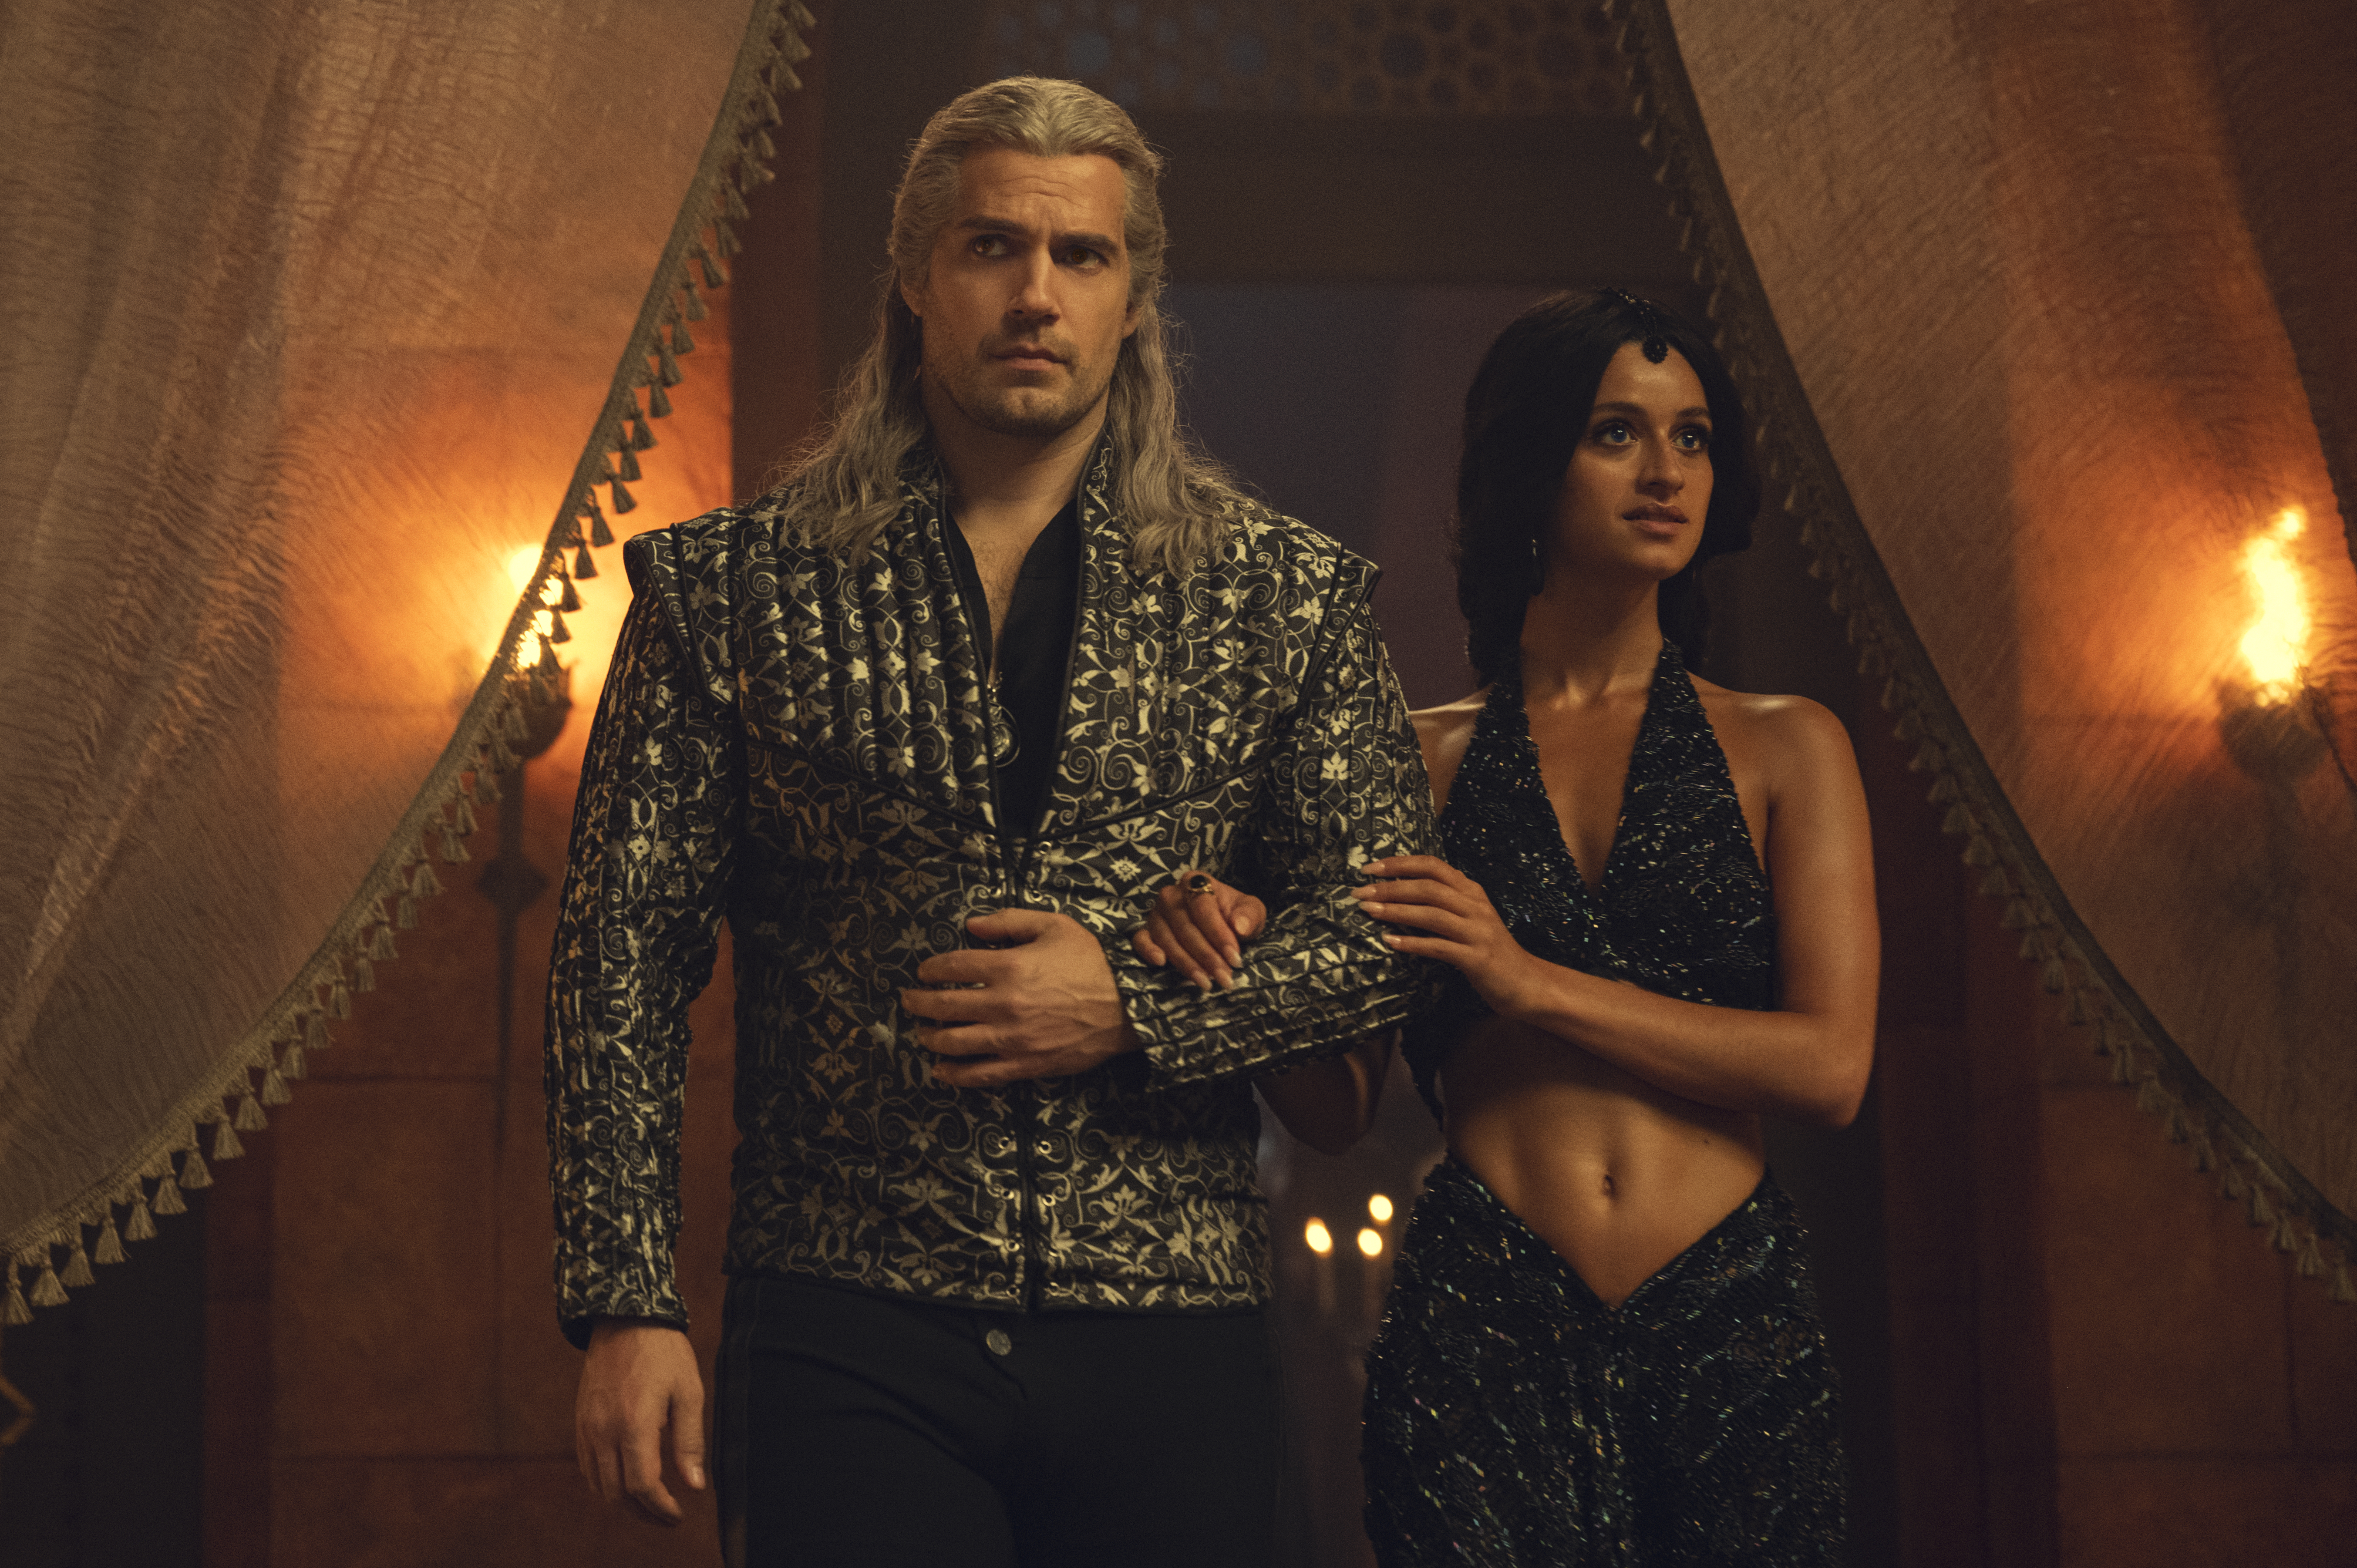 Geralt (Henry Cavill) and Yen (Anya Charlotra) arriving at a party in fancy clothes